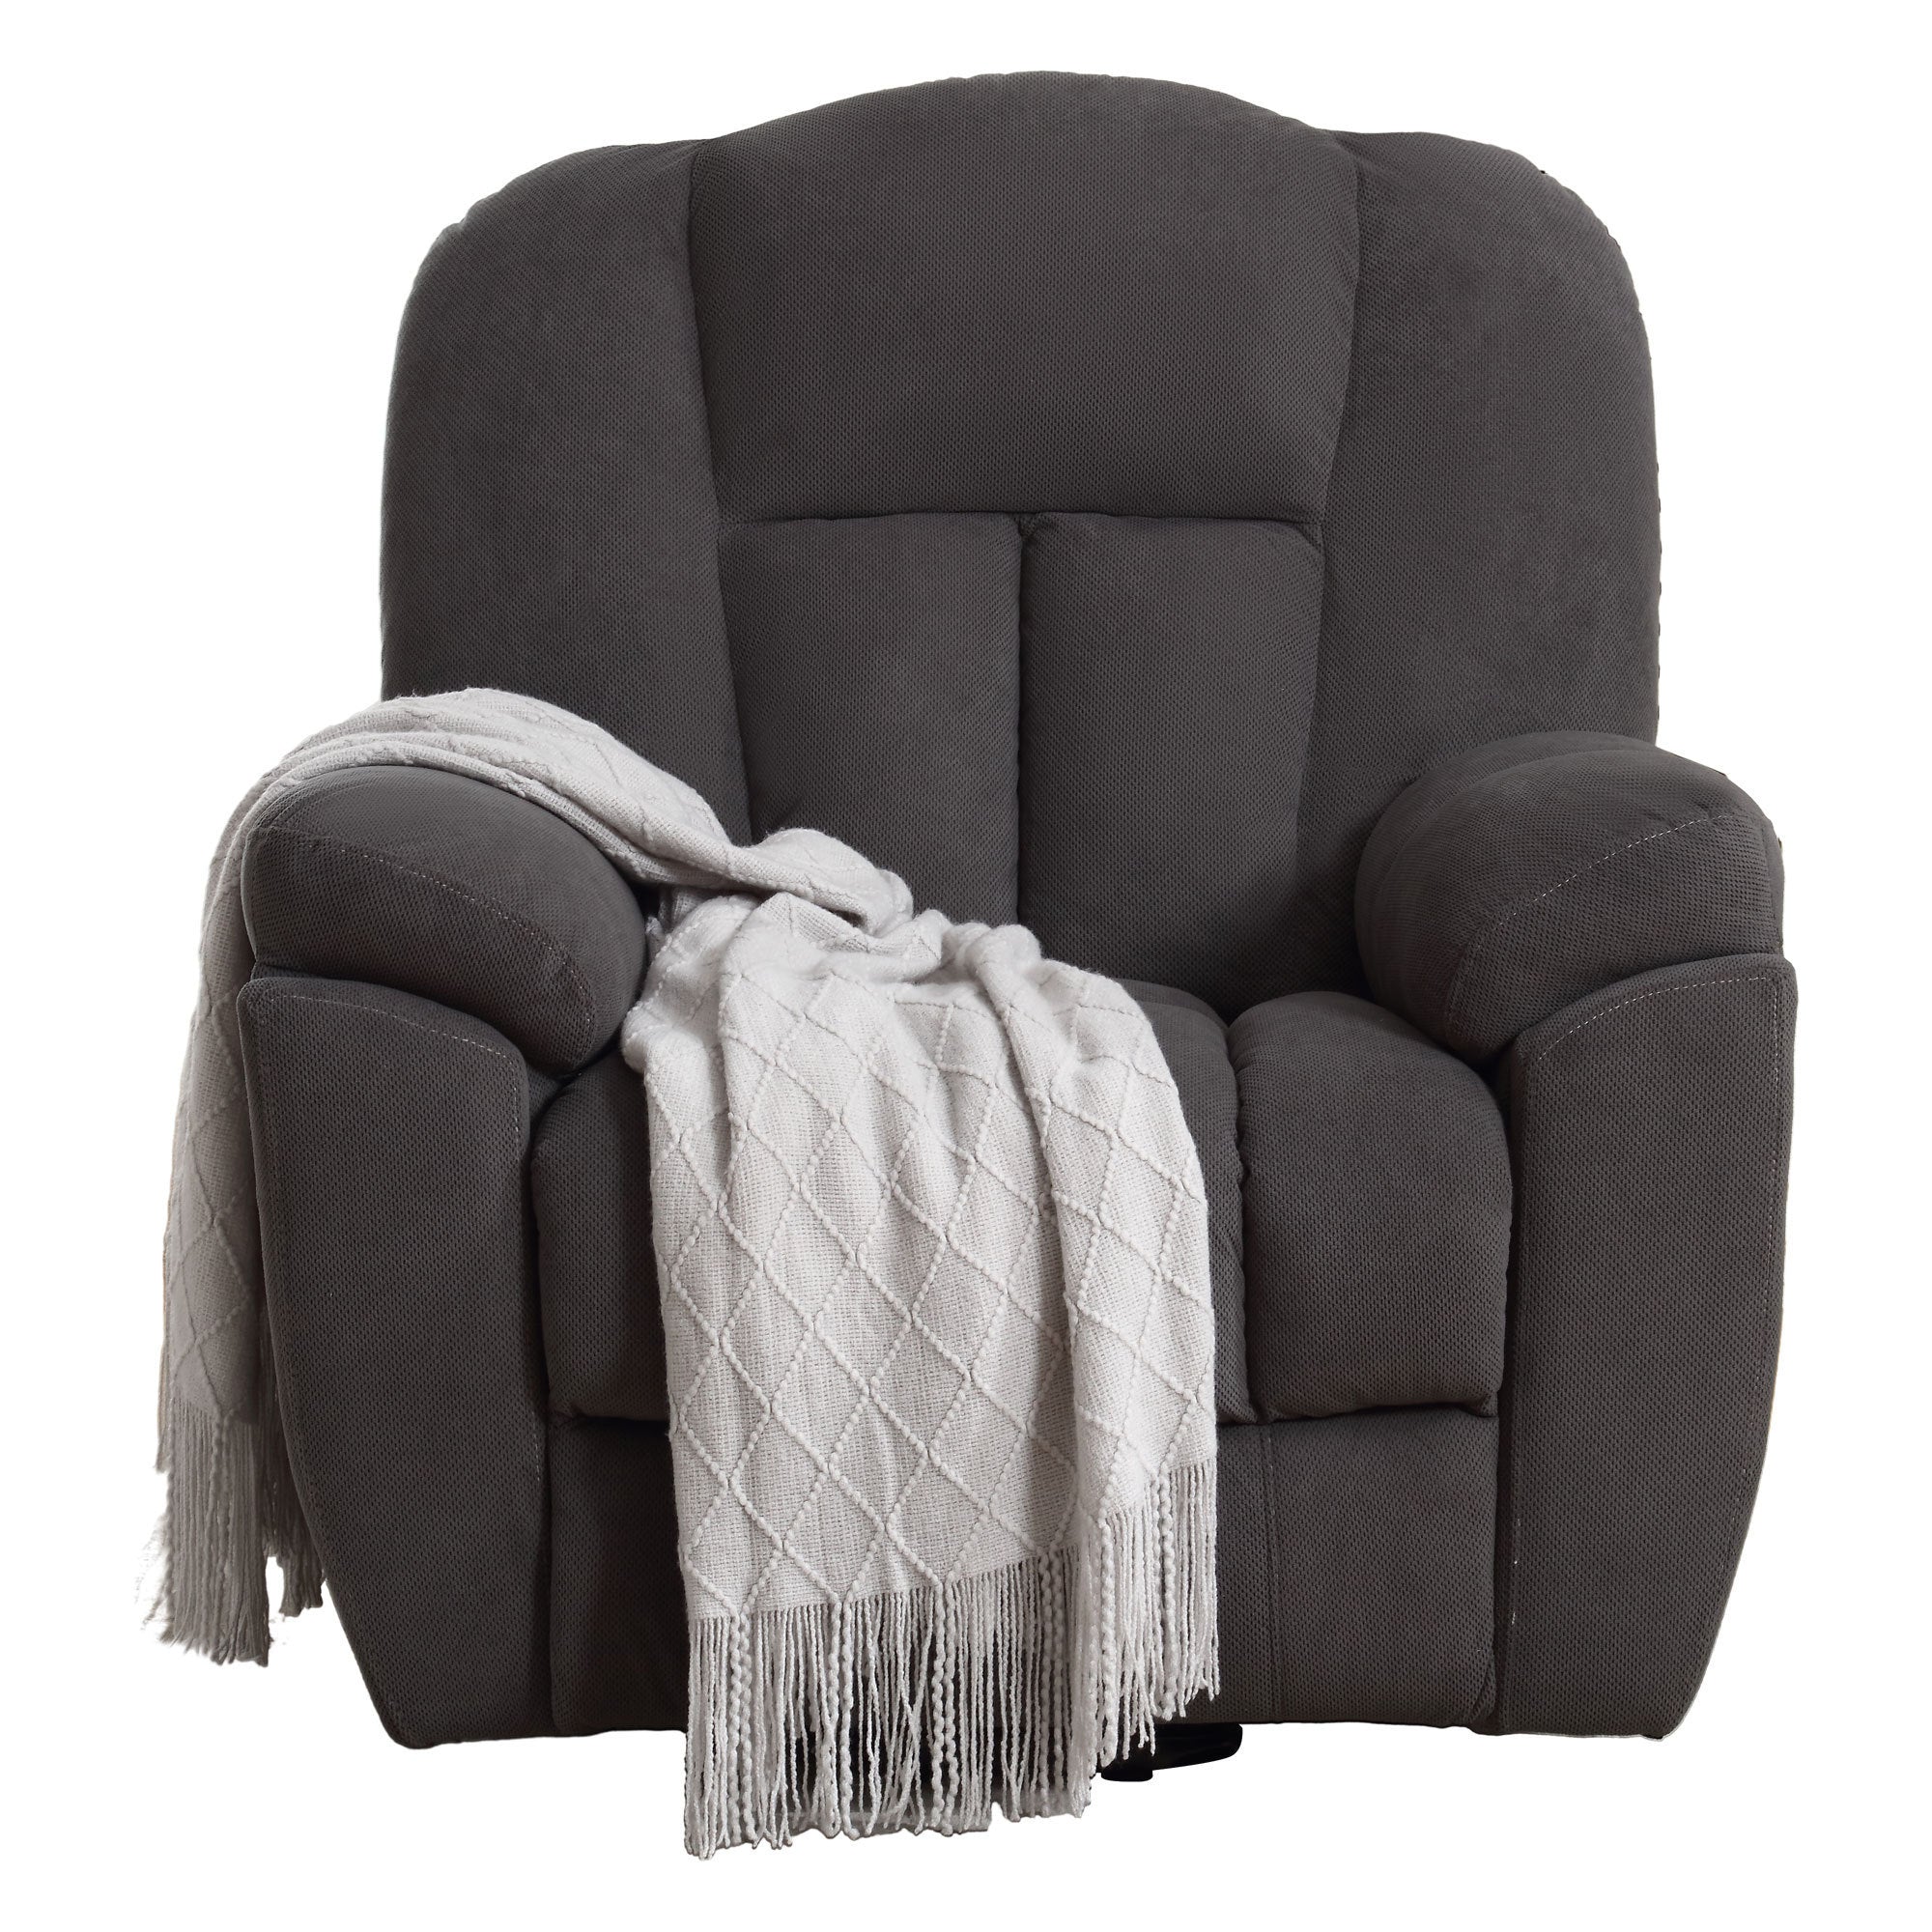 Infinite Position Power Lift Recliner with Heat and Massage, with throw blanket